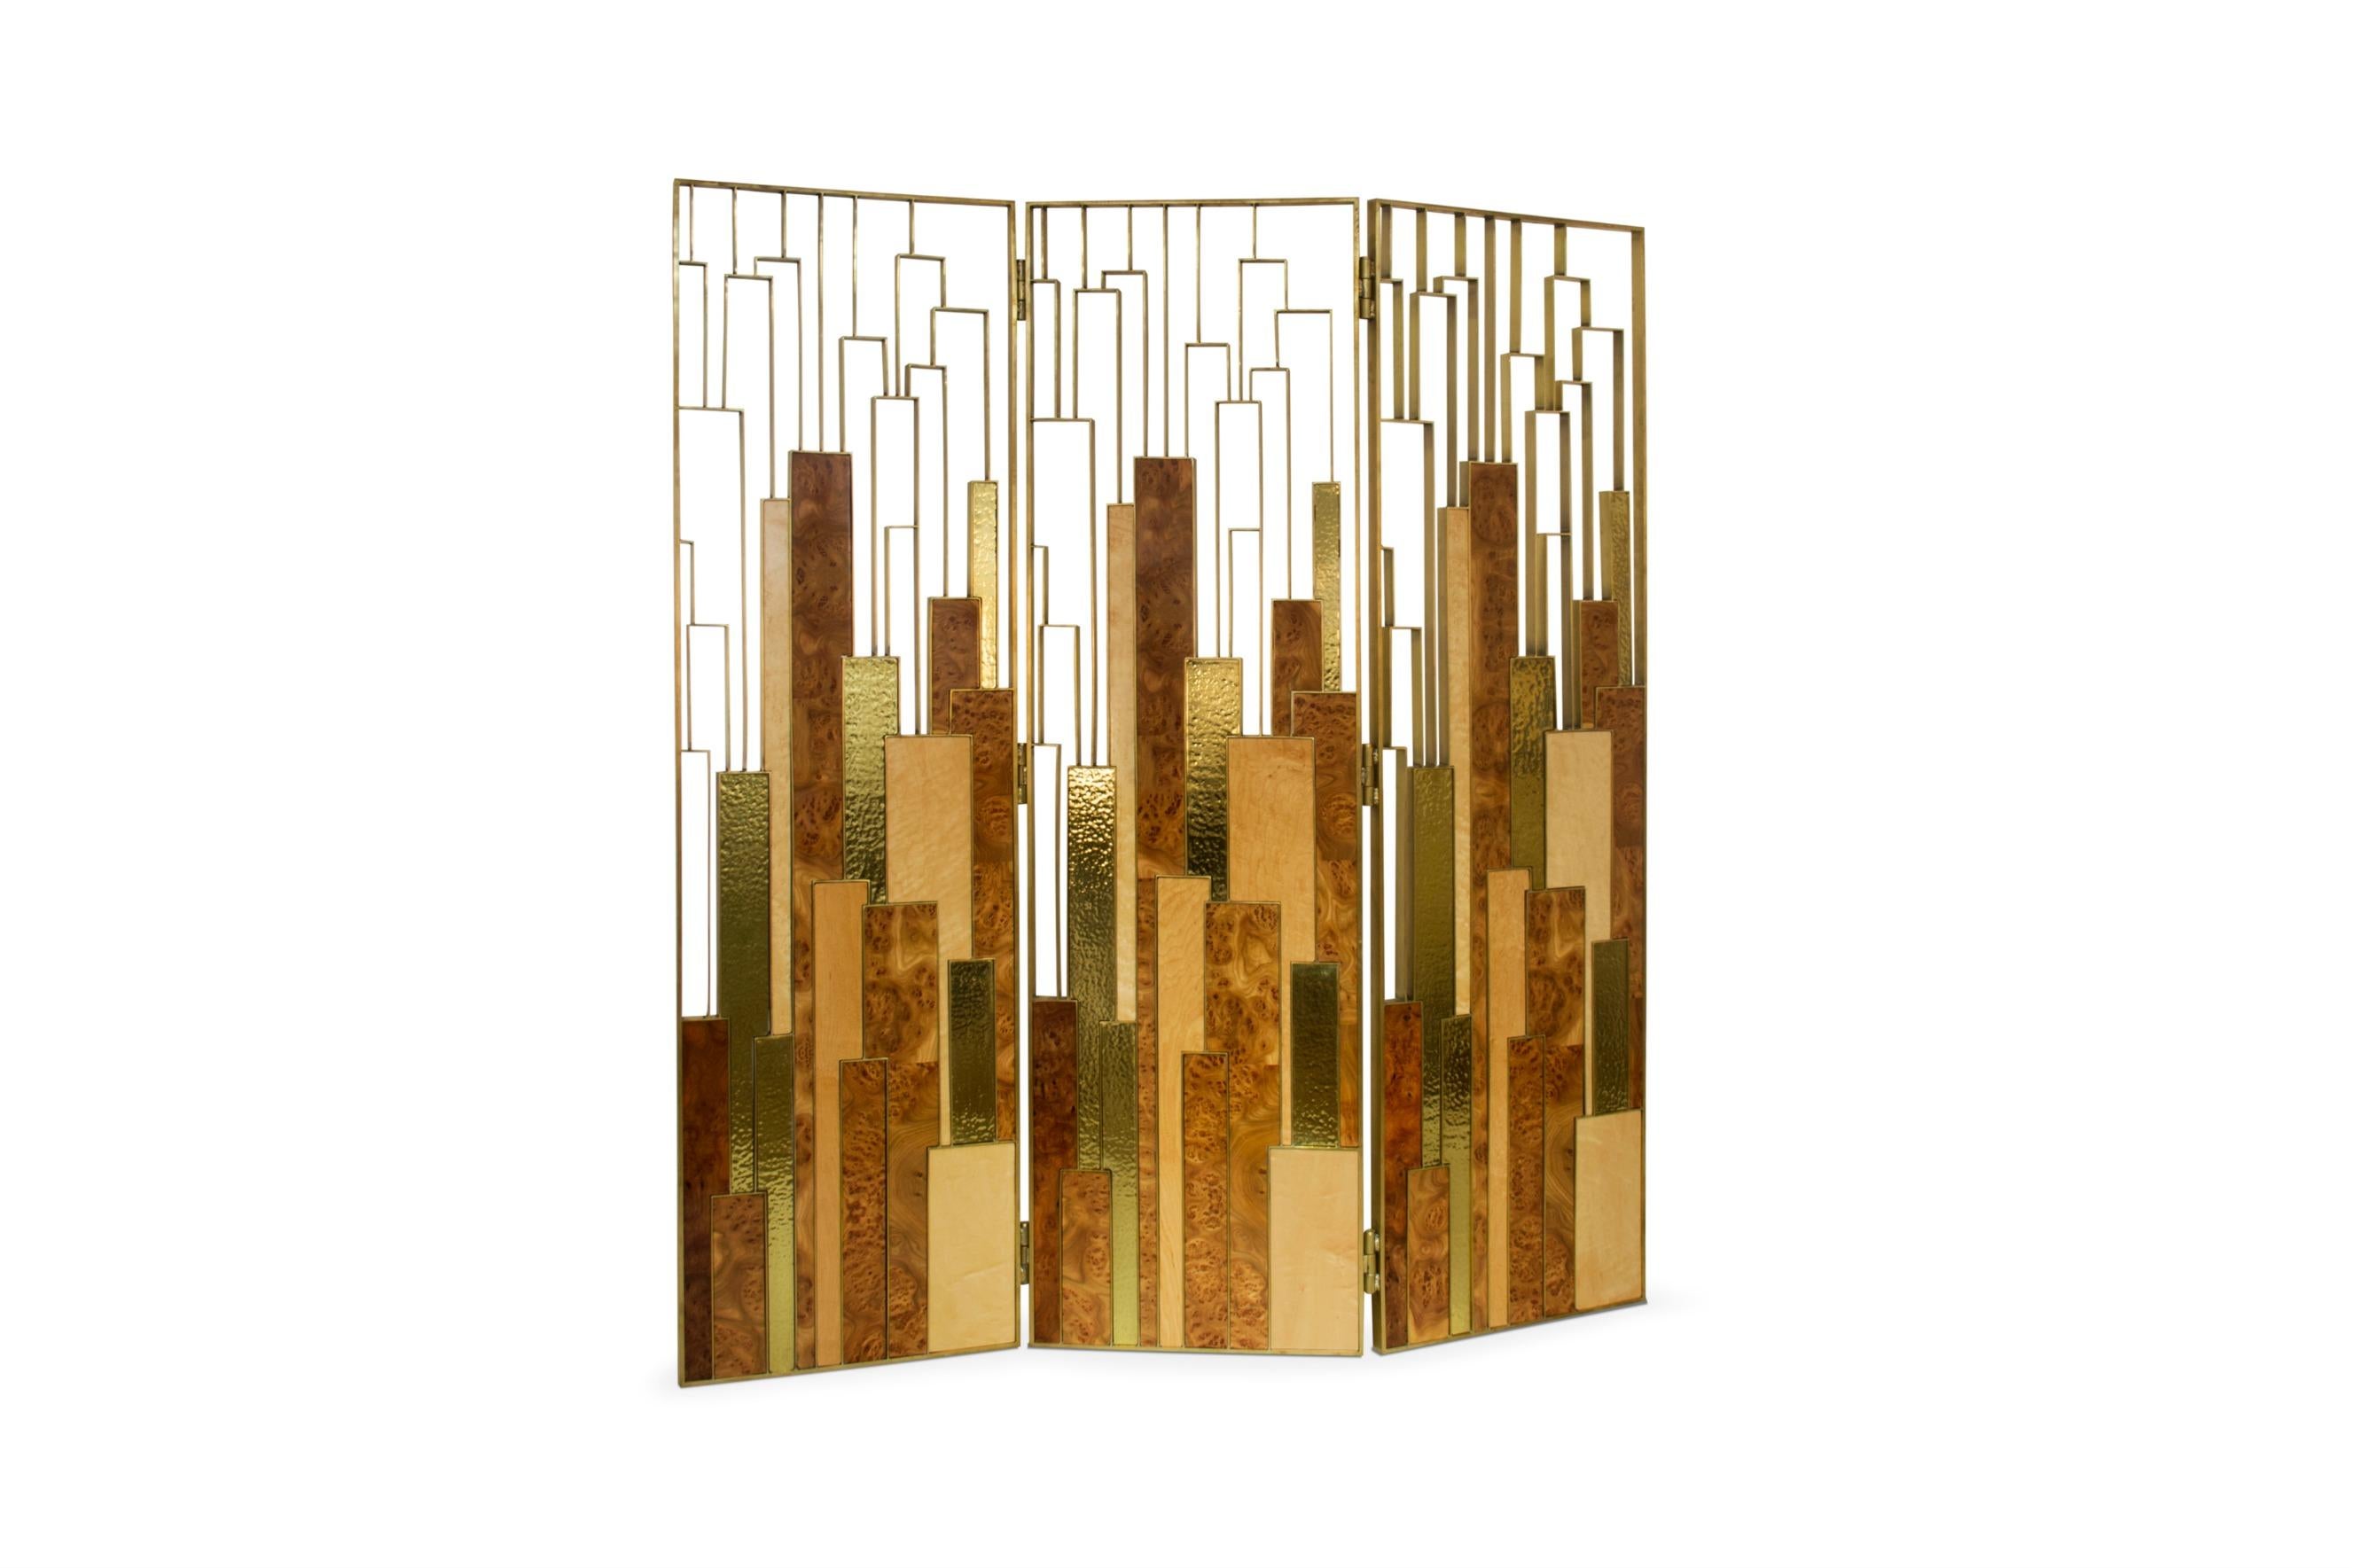 Back to a world of magic, Delphi, ancient Greece’s holiest, prophesied the future of kings and countries. Delphi screen brings oracle to life through its bird’s eye wood veneer, glossy elm root wood veneer and polished hammered brass. This folding